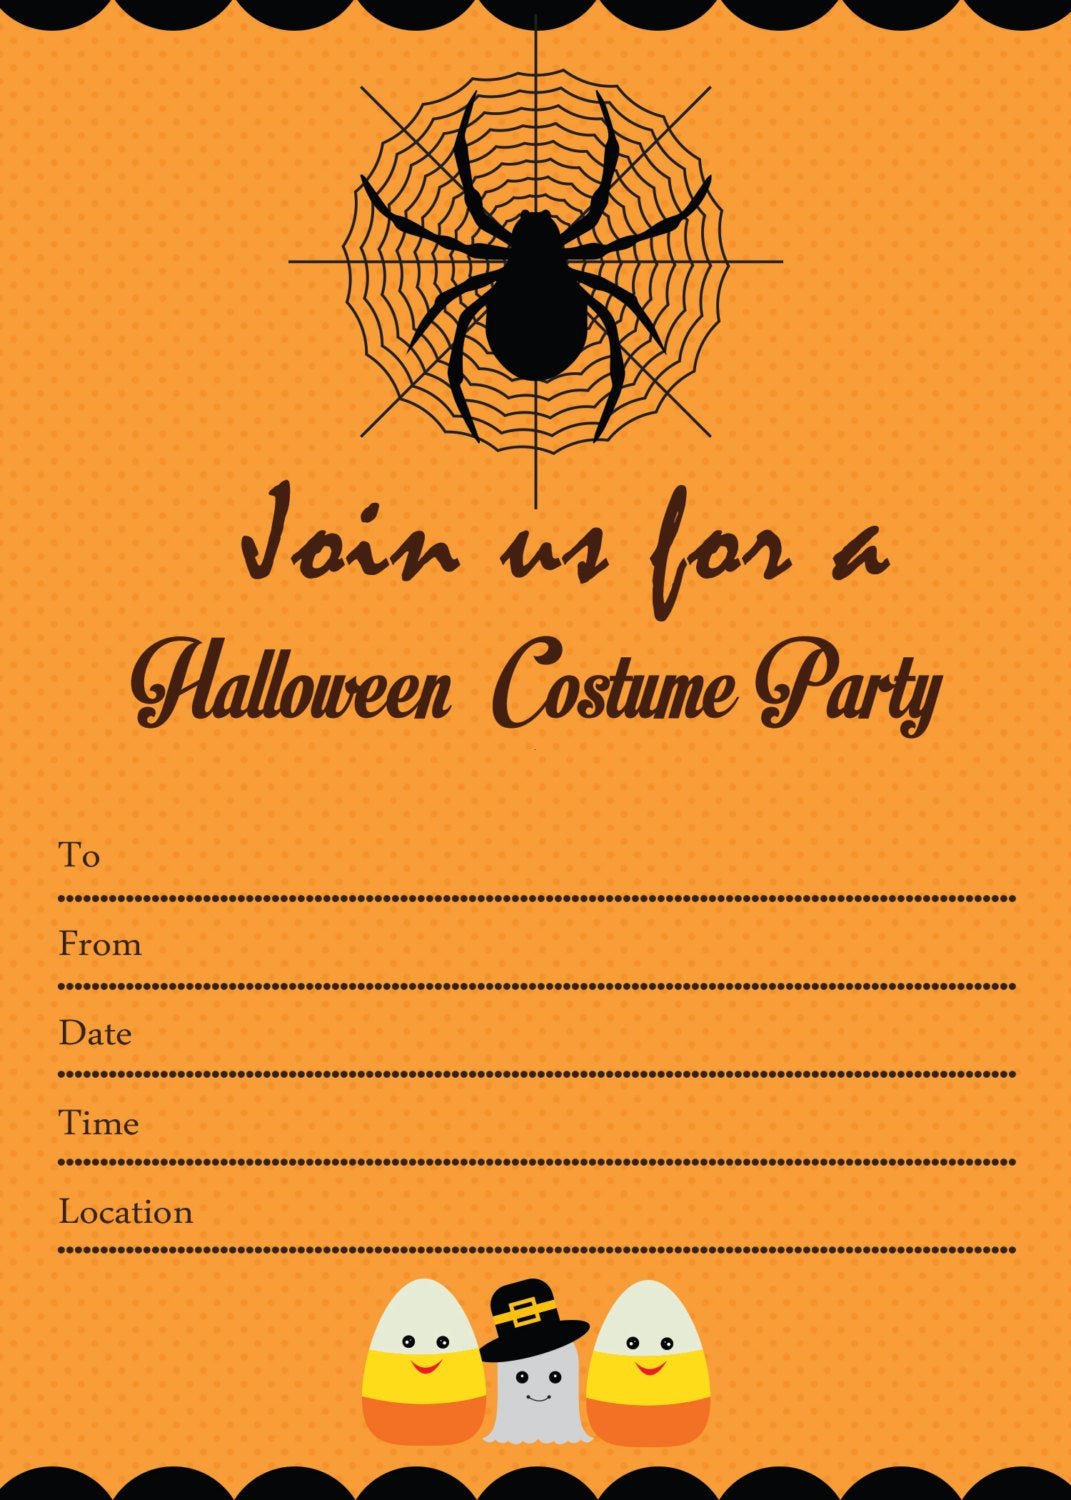 Halloween Party Invitations Template Spooky Halloween Costume Party Invitation by Candybeedesigns